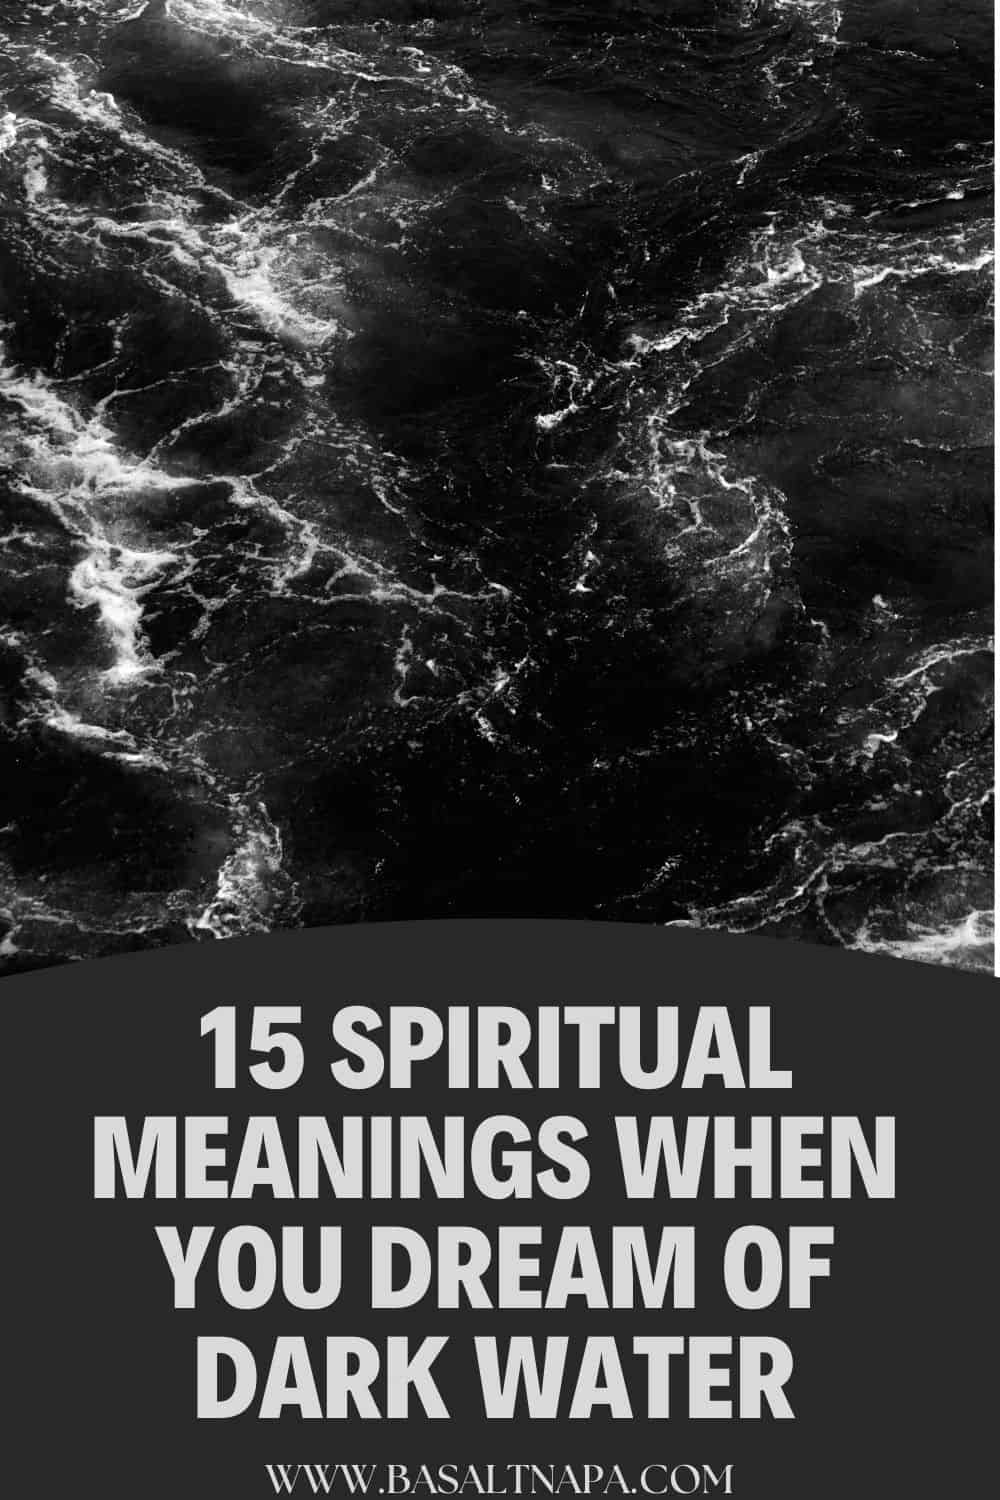 15 Spiritual Meanings When You Dream of Dark Water